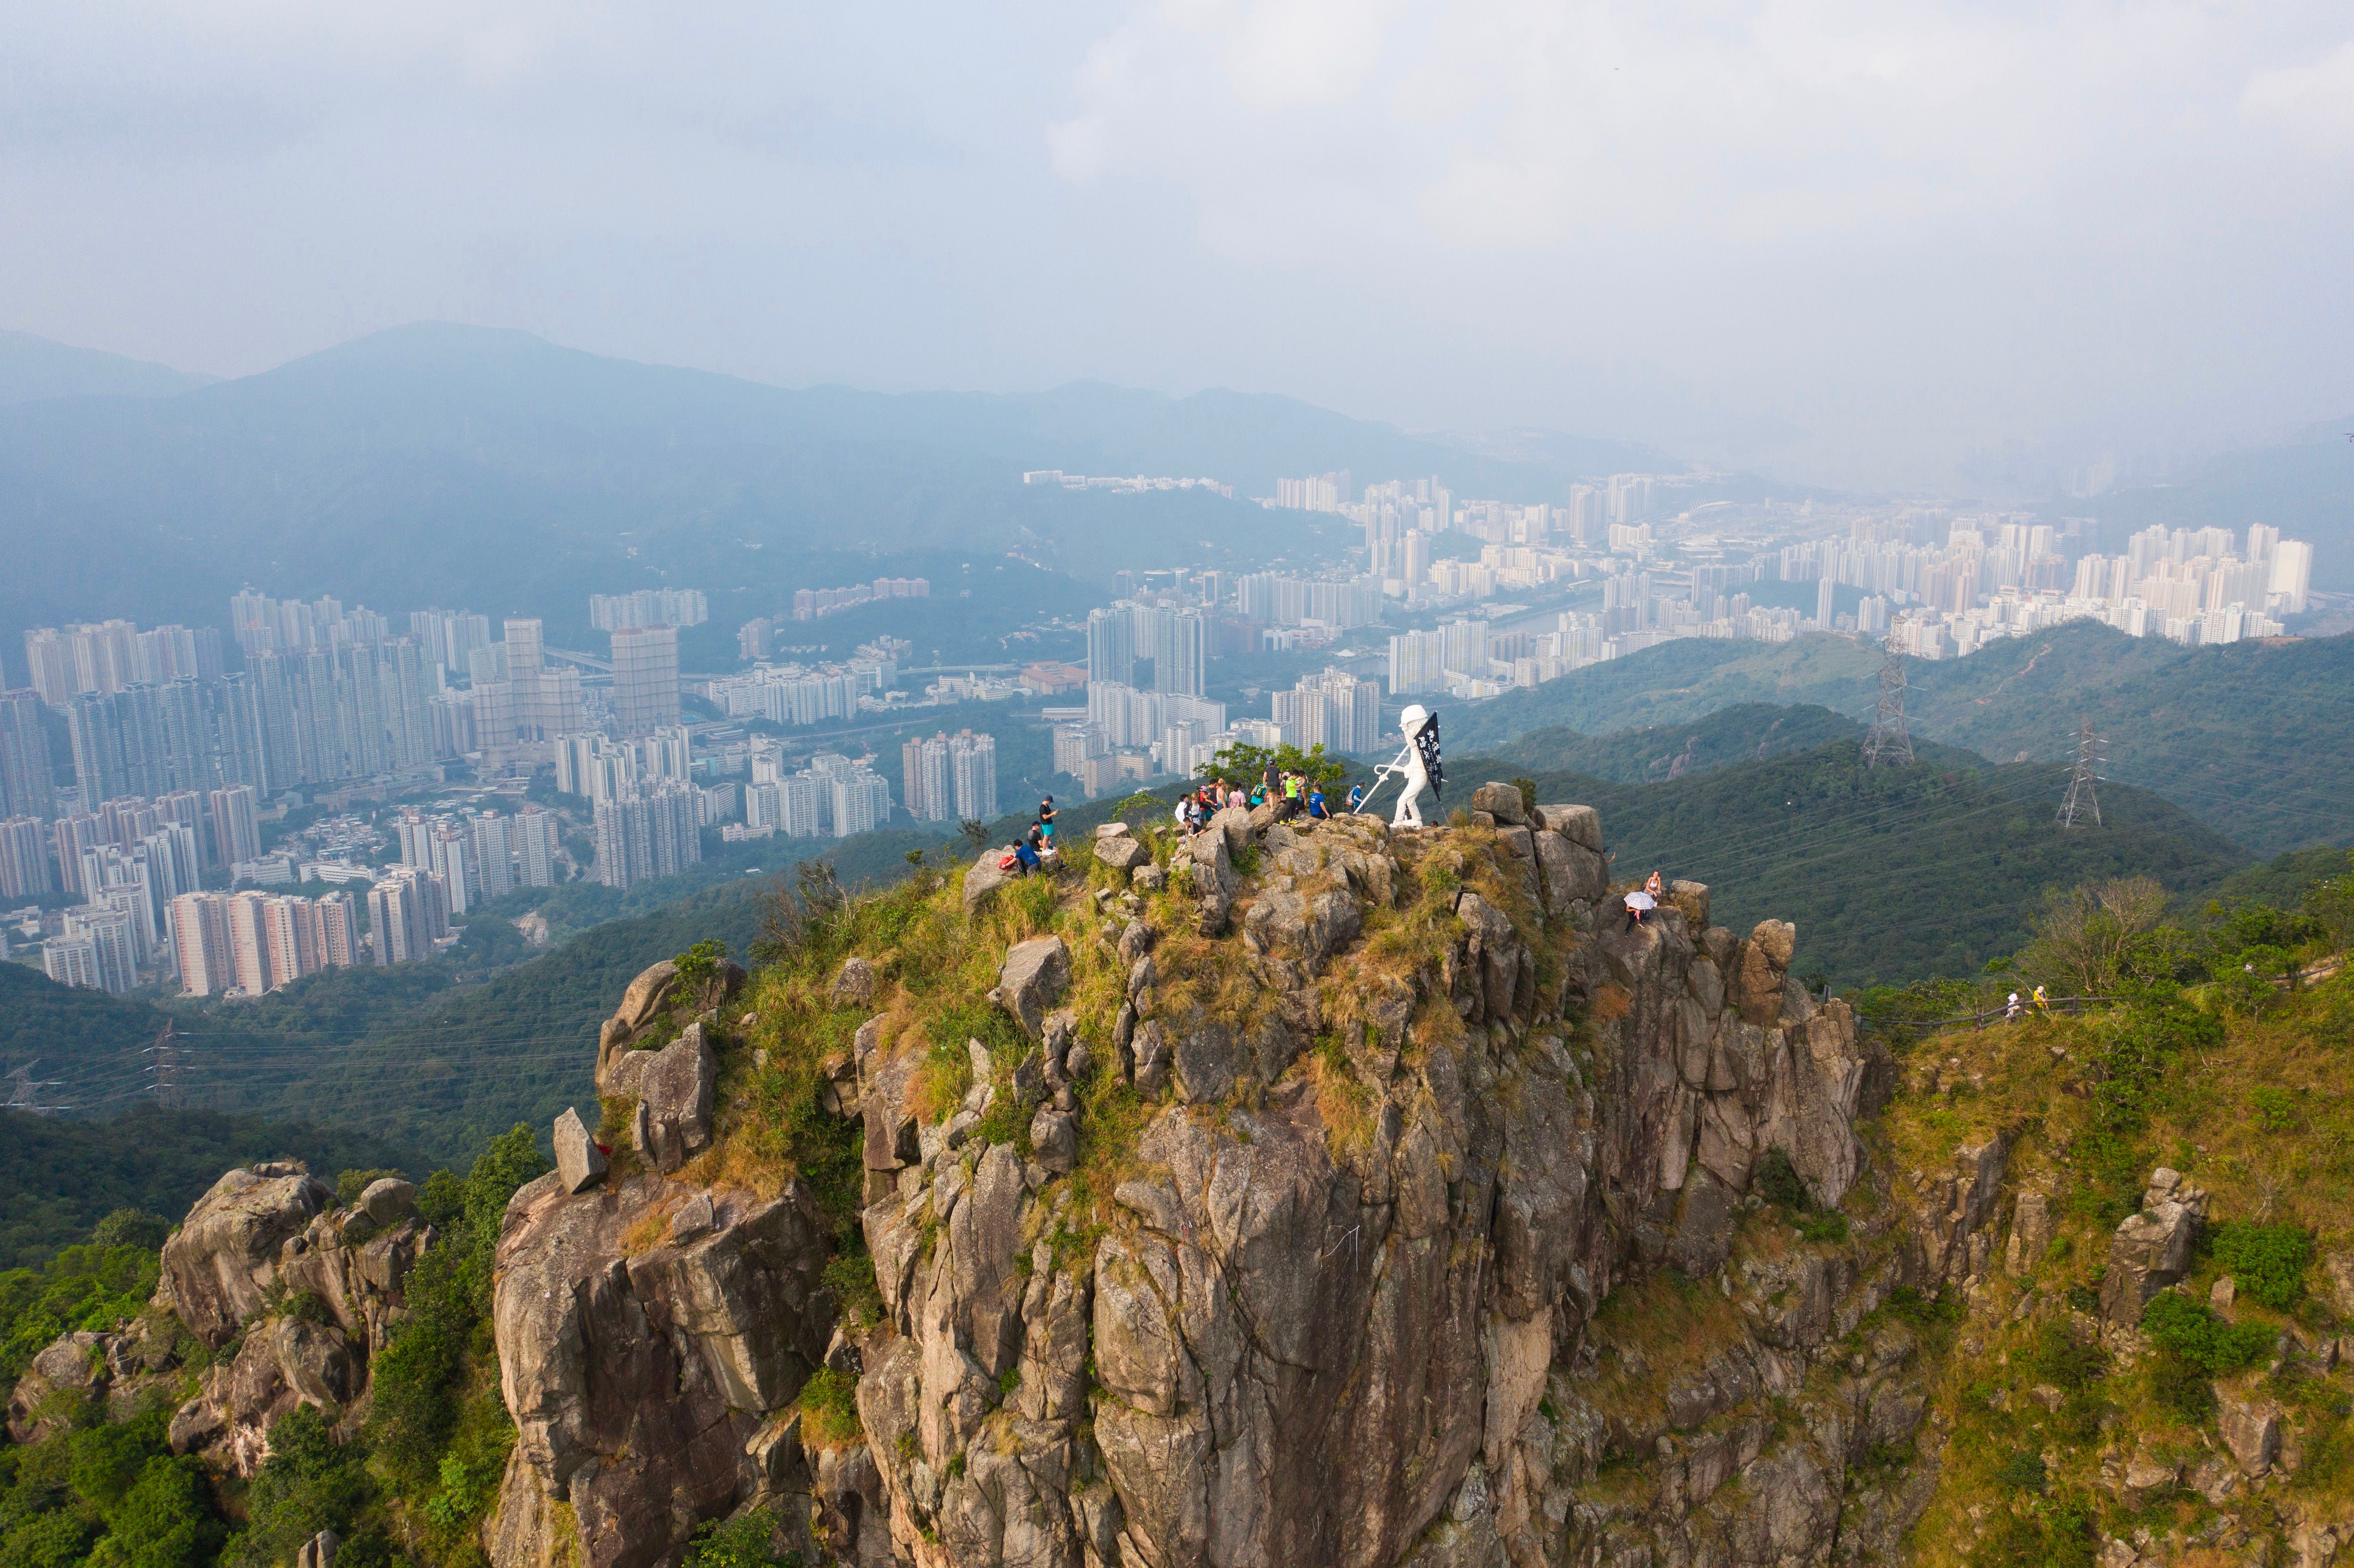 Lion Rock is one of Hong Kong's most famous mountains